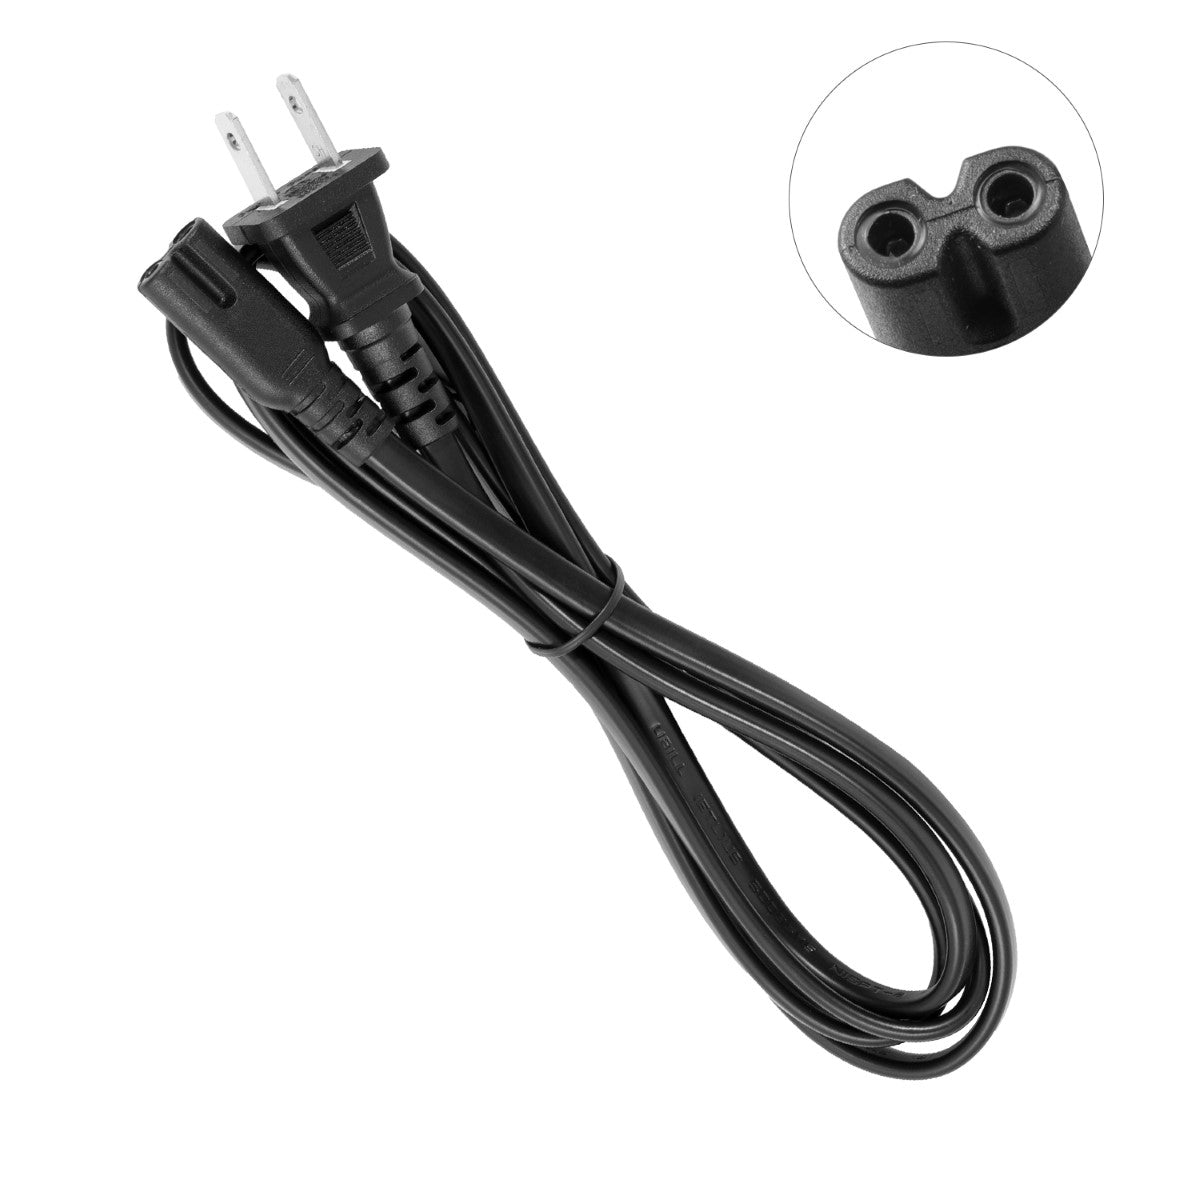 Power Cord for HP ENVY 4516 e-All-in-One Printer.